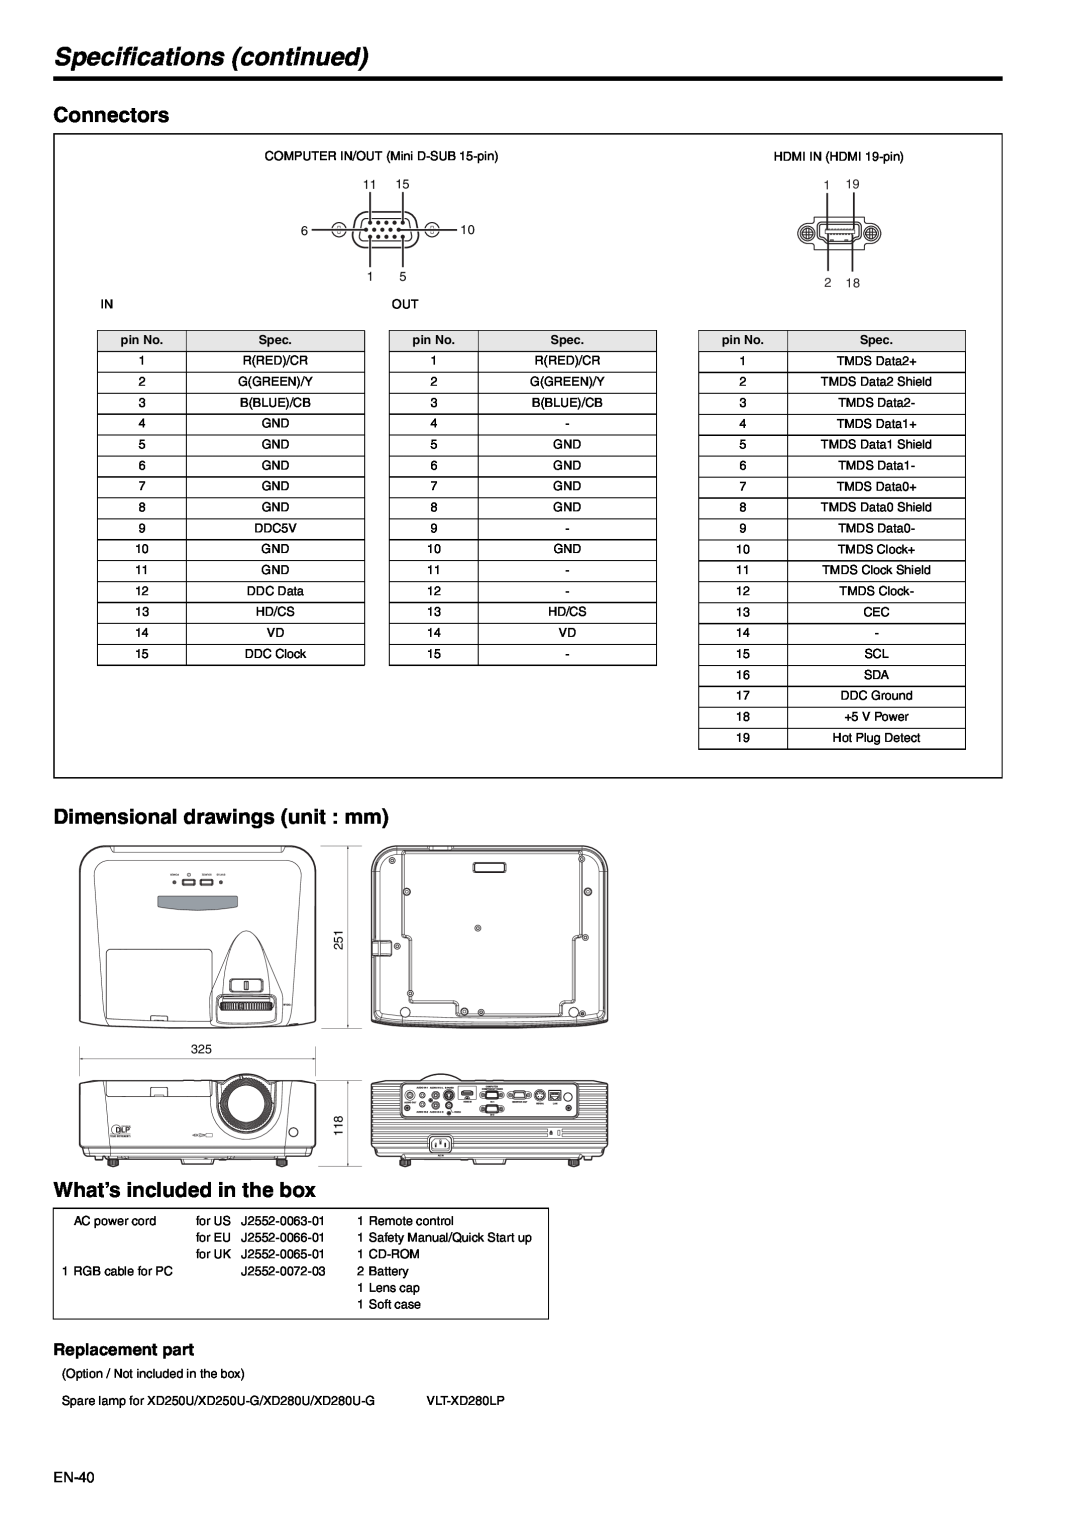 Mitsubishi Electronics XD280U-G Specifications continued, Connectors, Dimensional drawings unit mm, Replacement part 